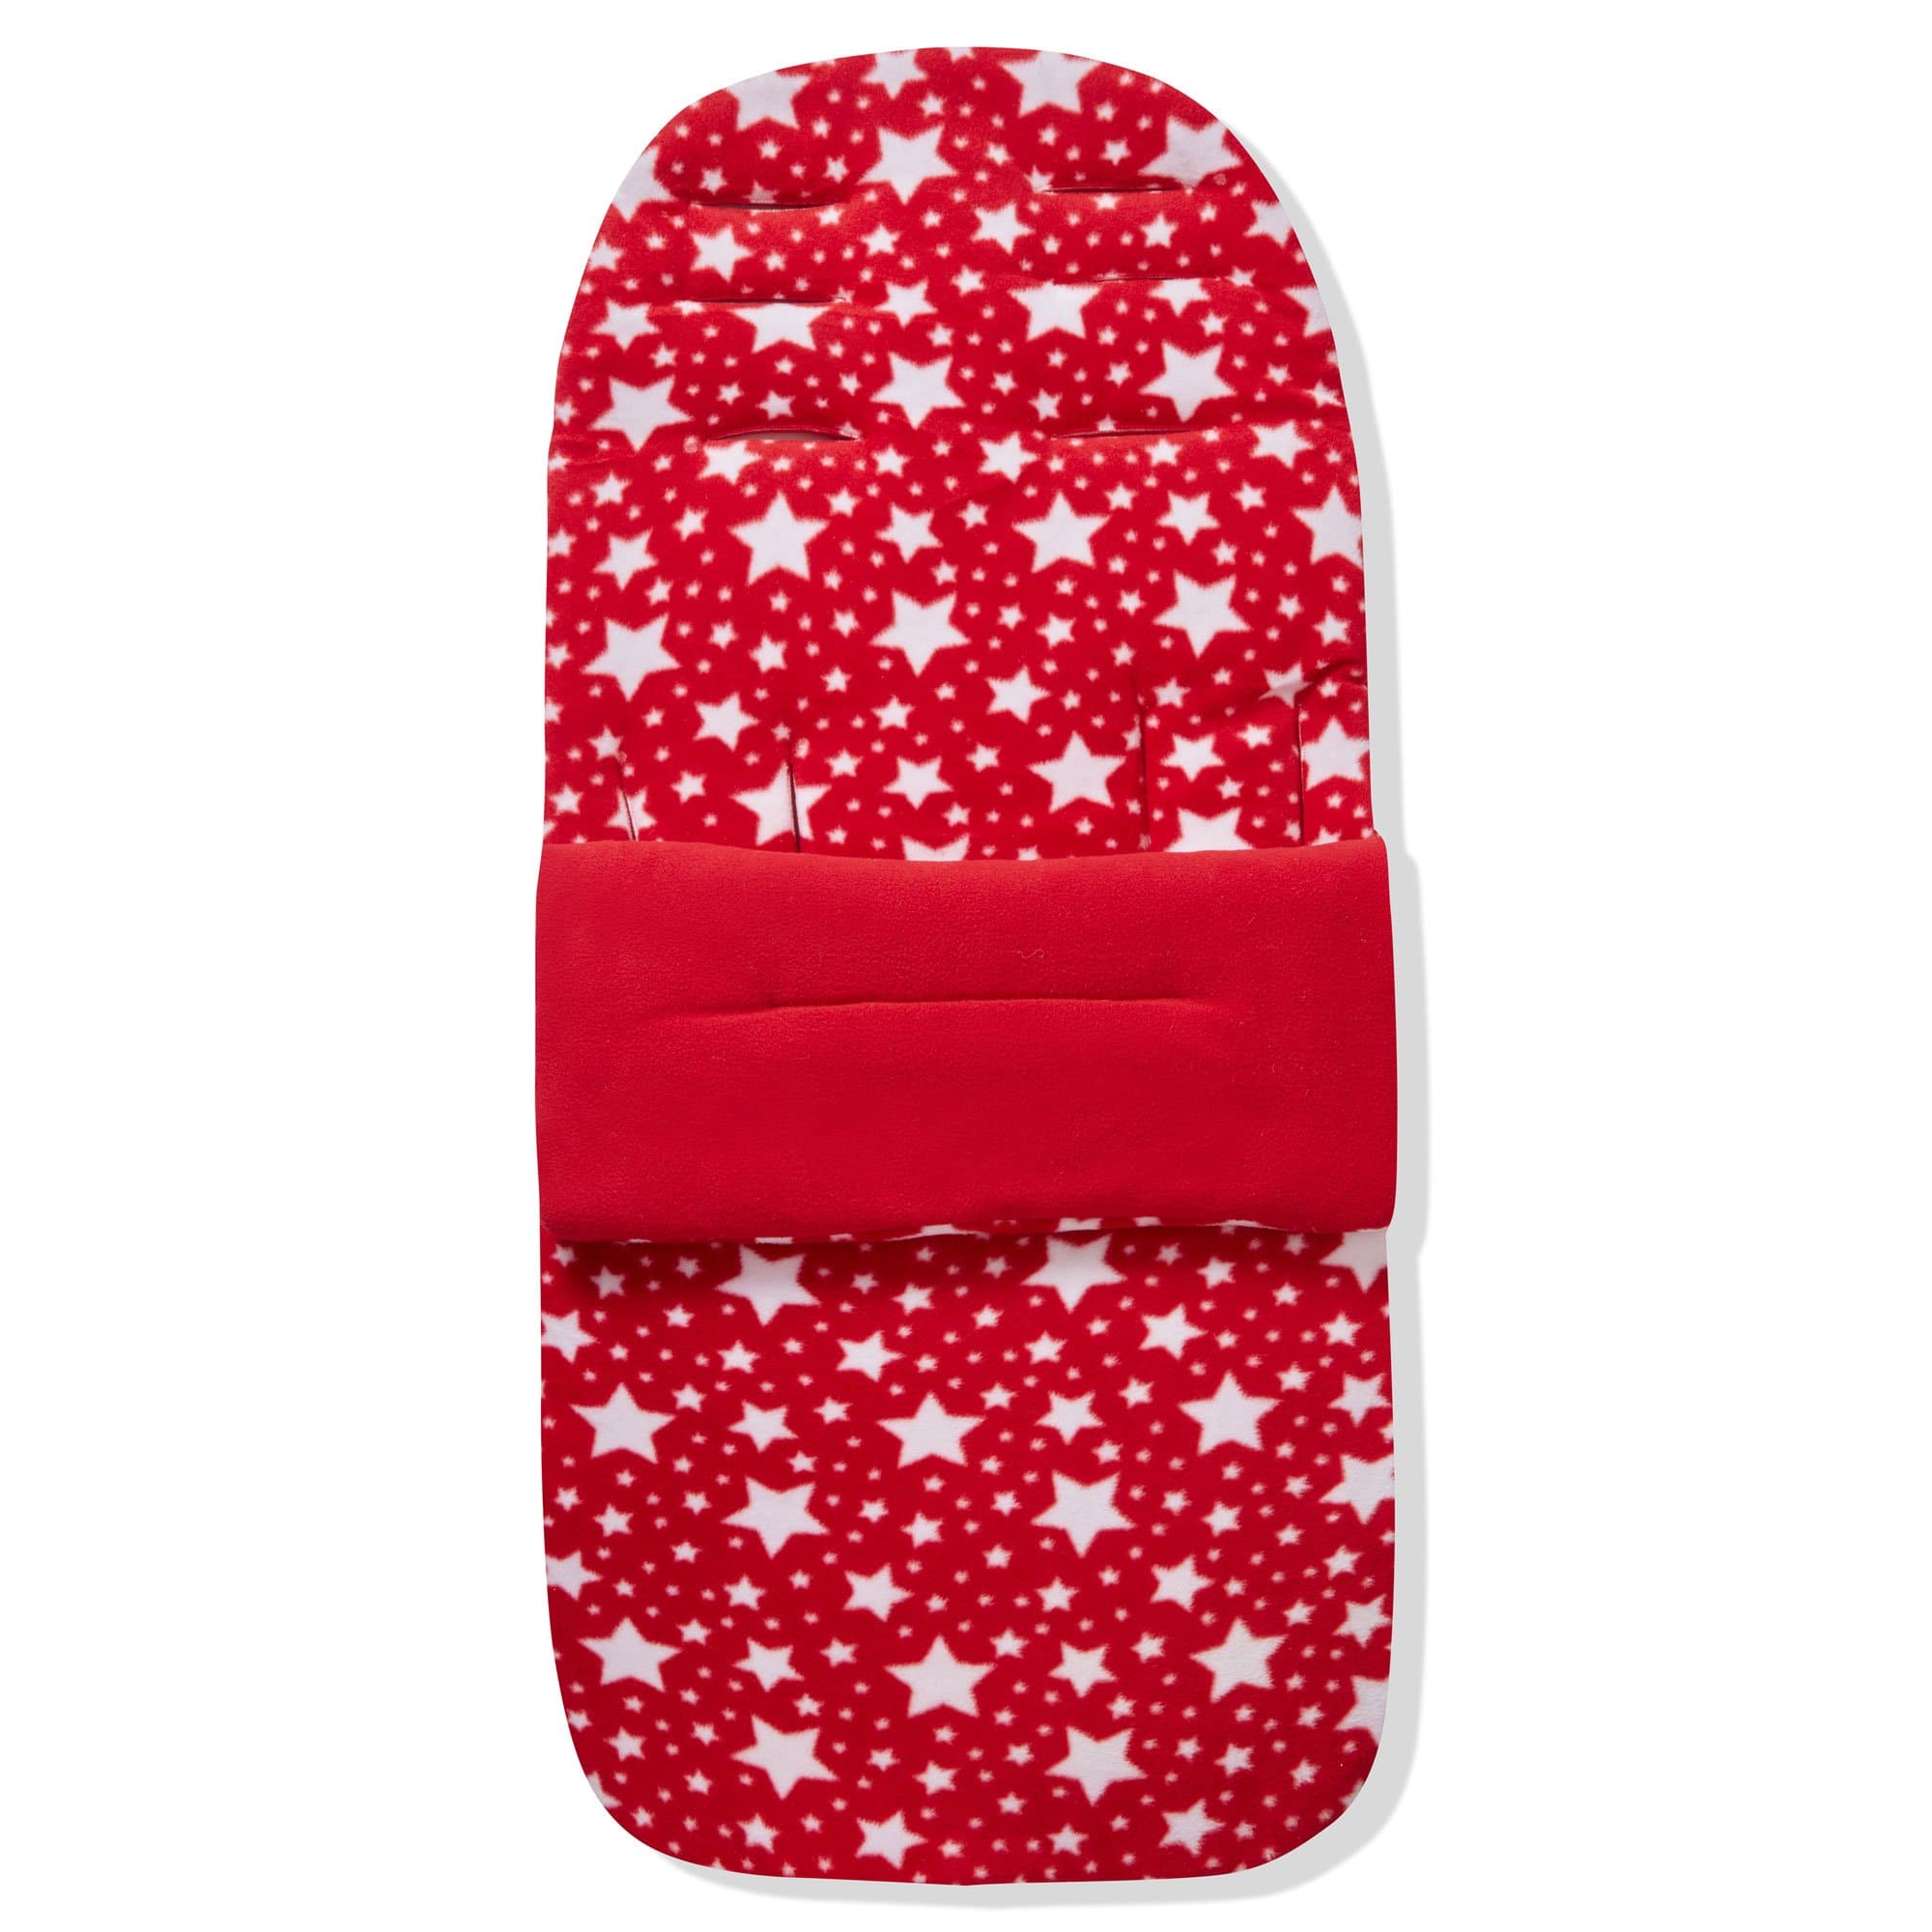 Fleece Footmuff / Cosy Toes Compatible with Diono - Red Star / Fits All Models | For Your Little One